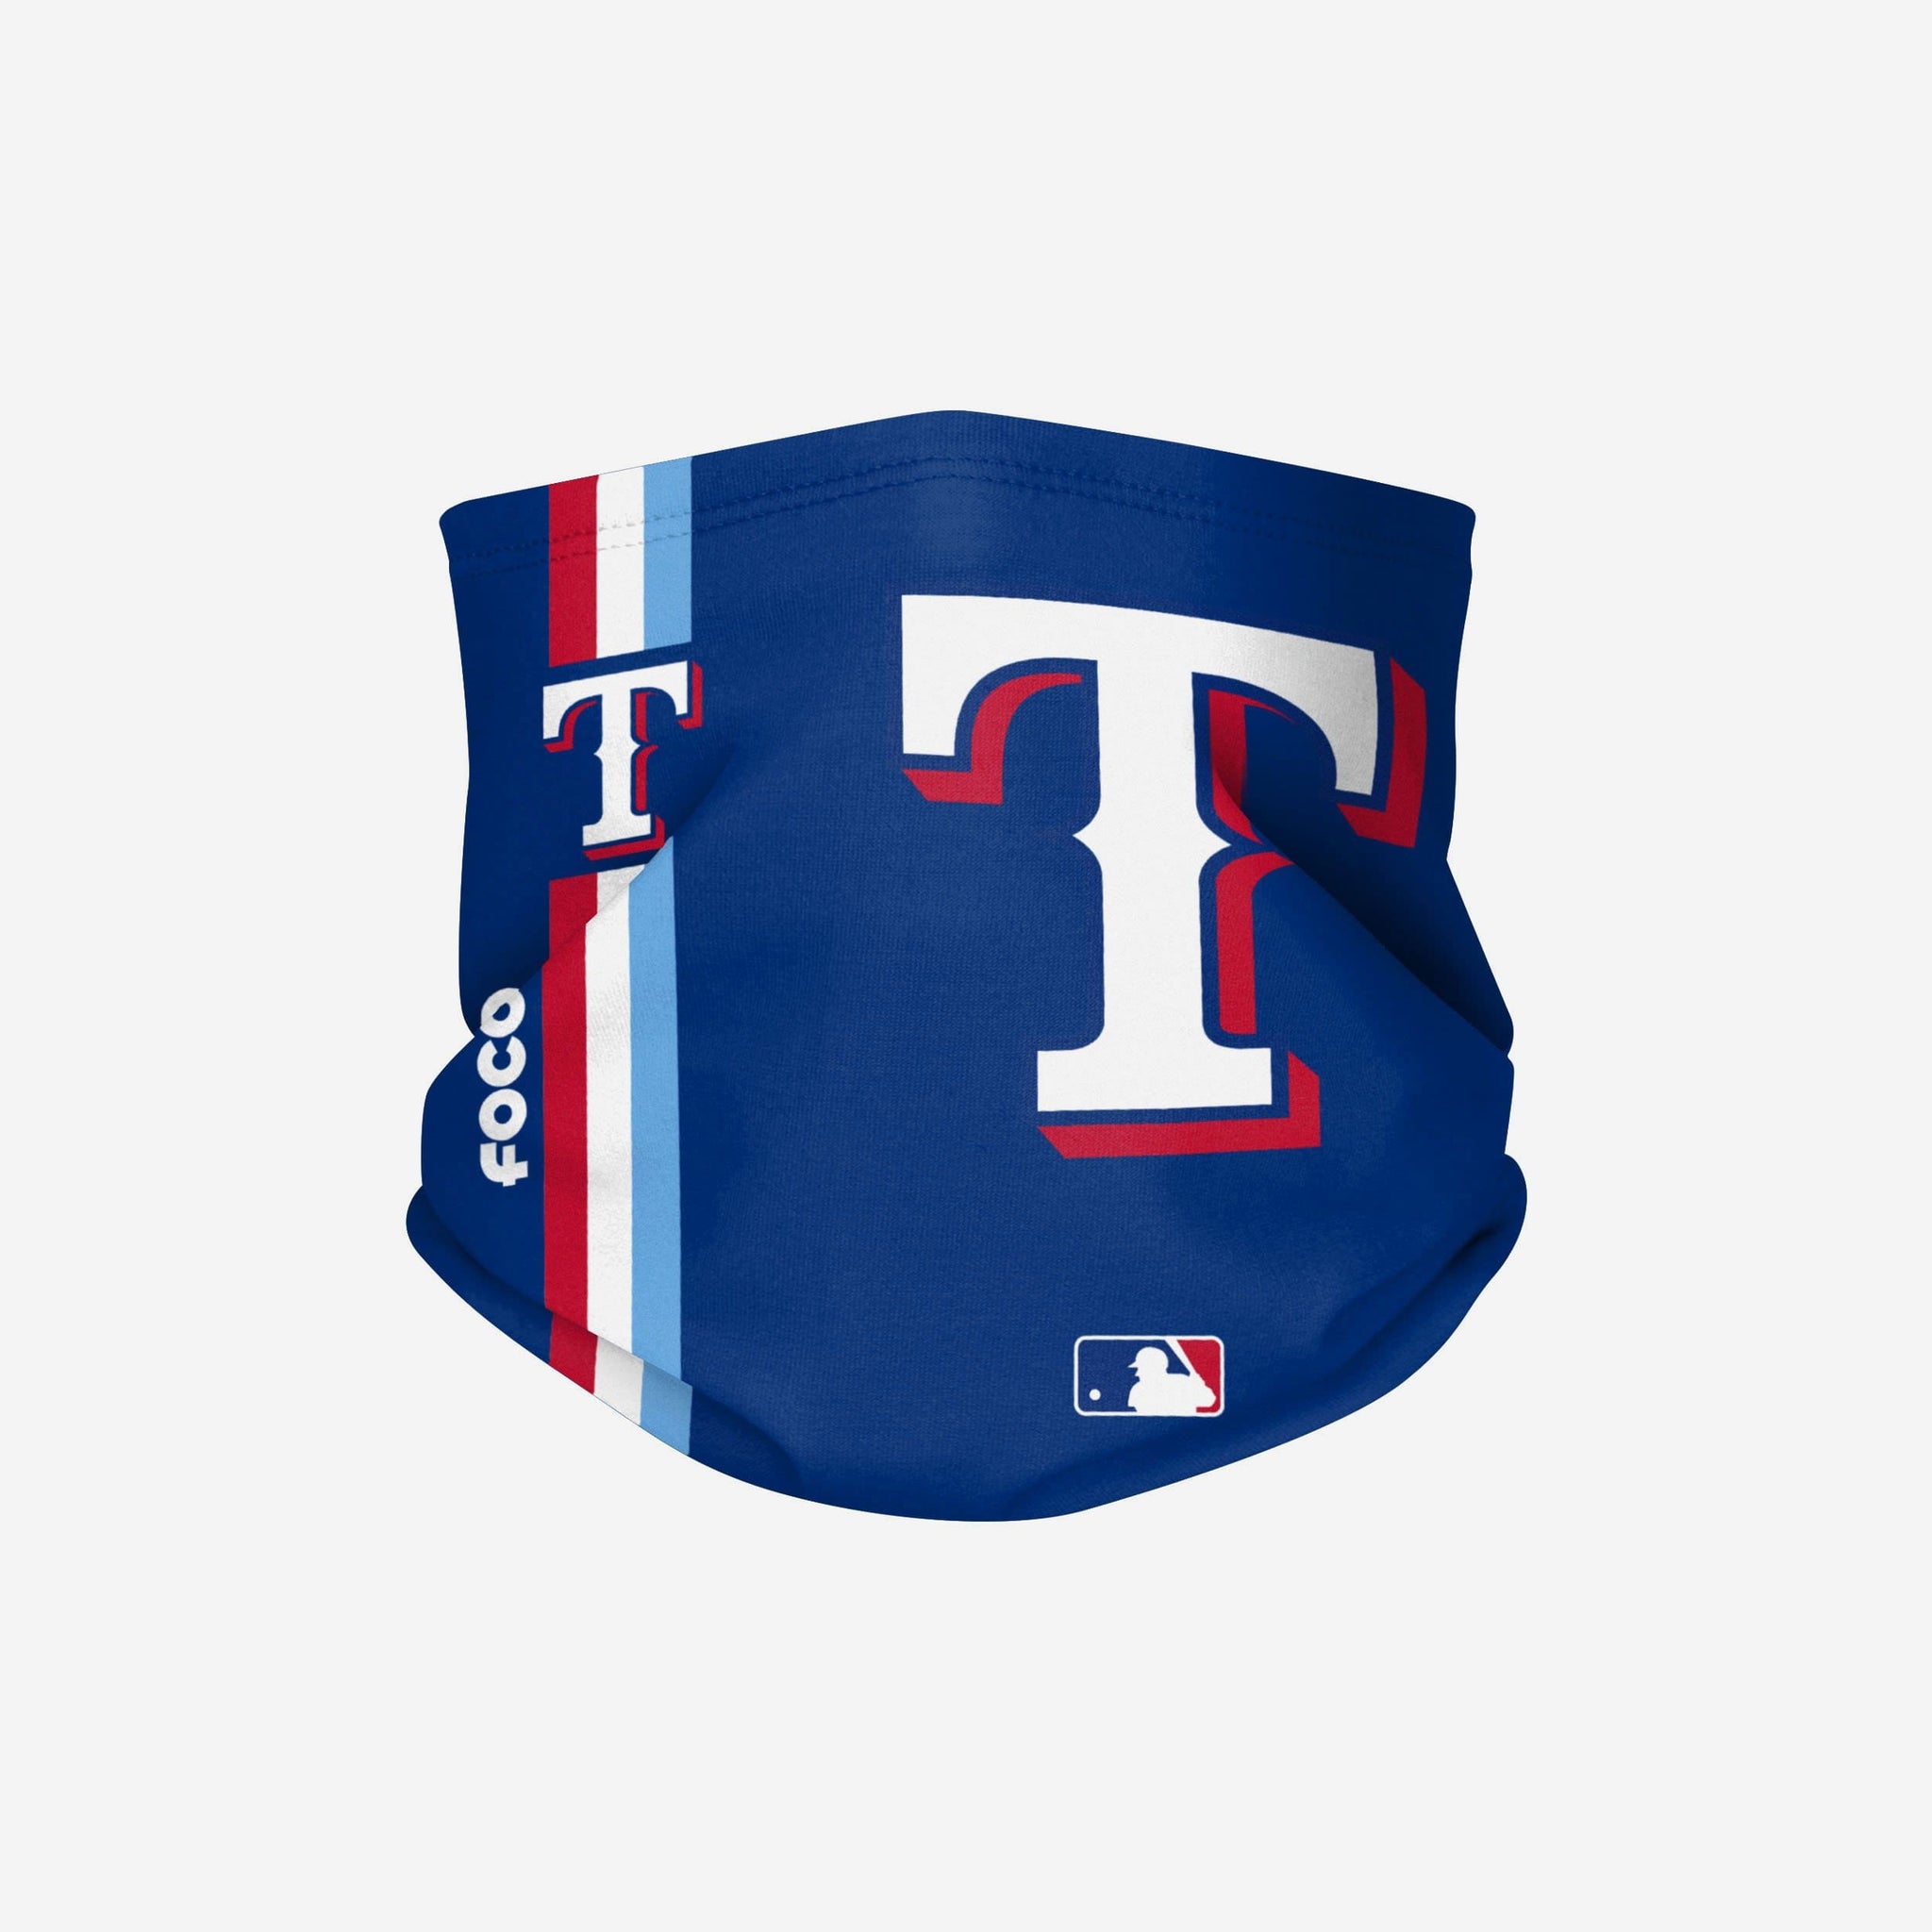 FOCO Texas Rangers Apparel & Clothing Items. Officially Licensed